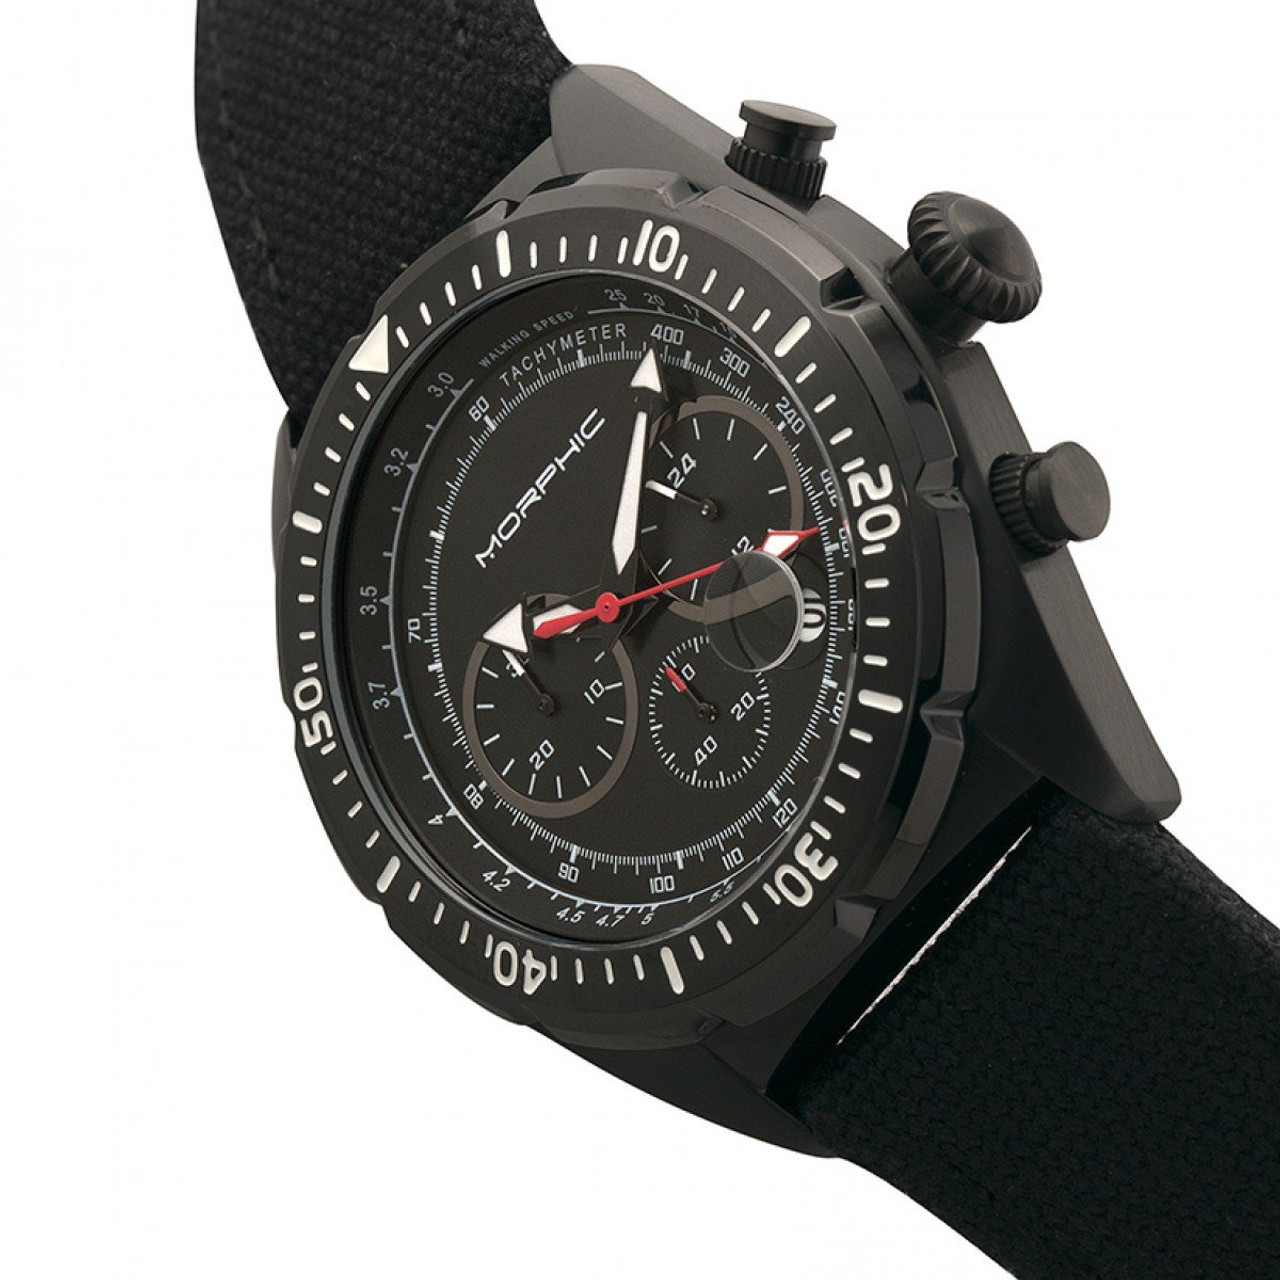 Morphic M53 Chronograph Fiber-Weaved Leather-Band Watch product image